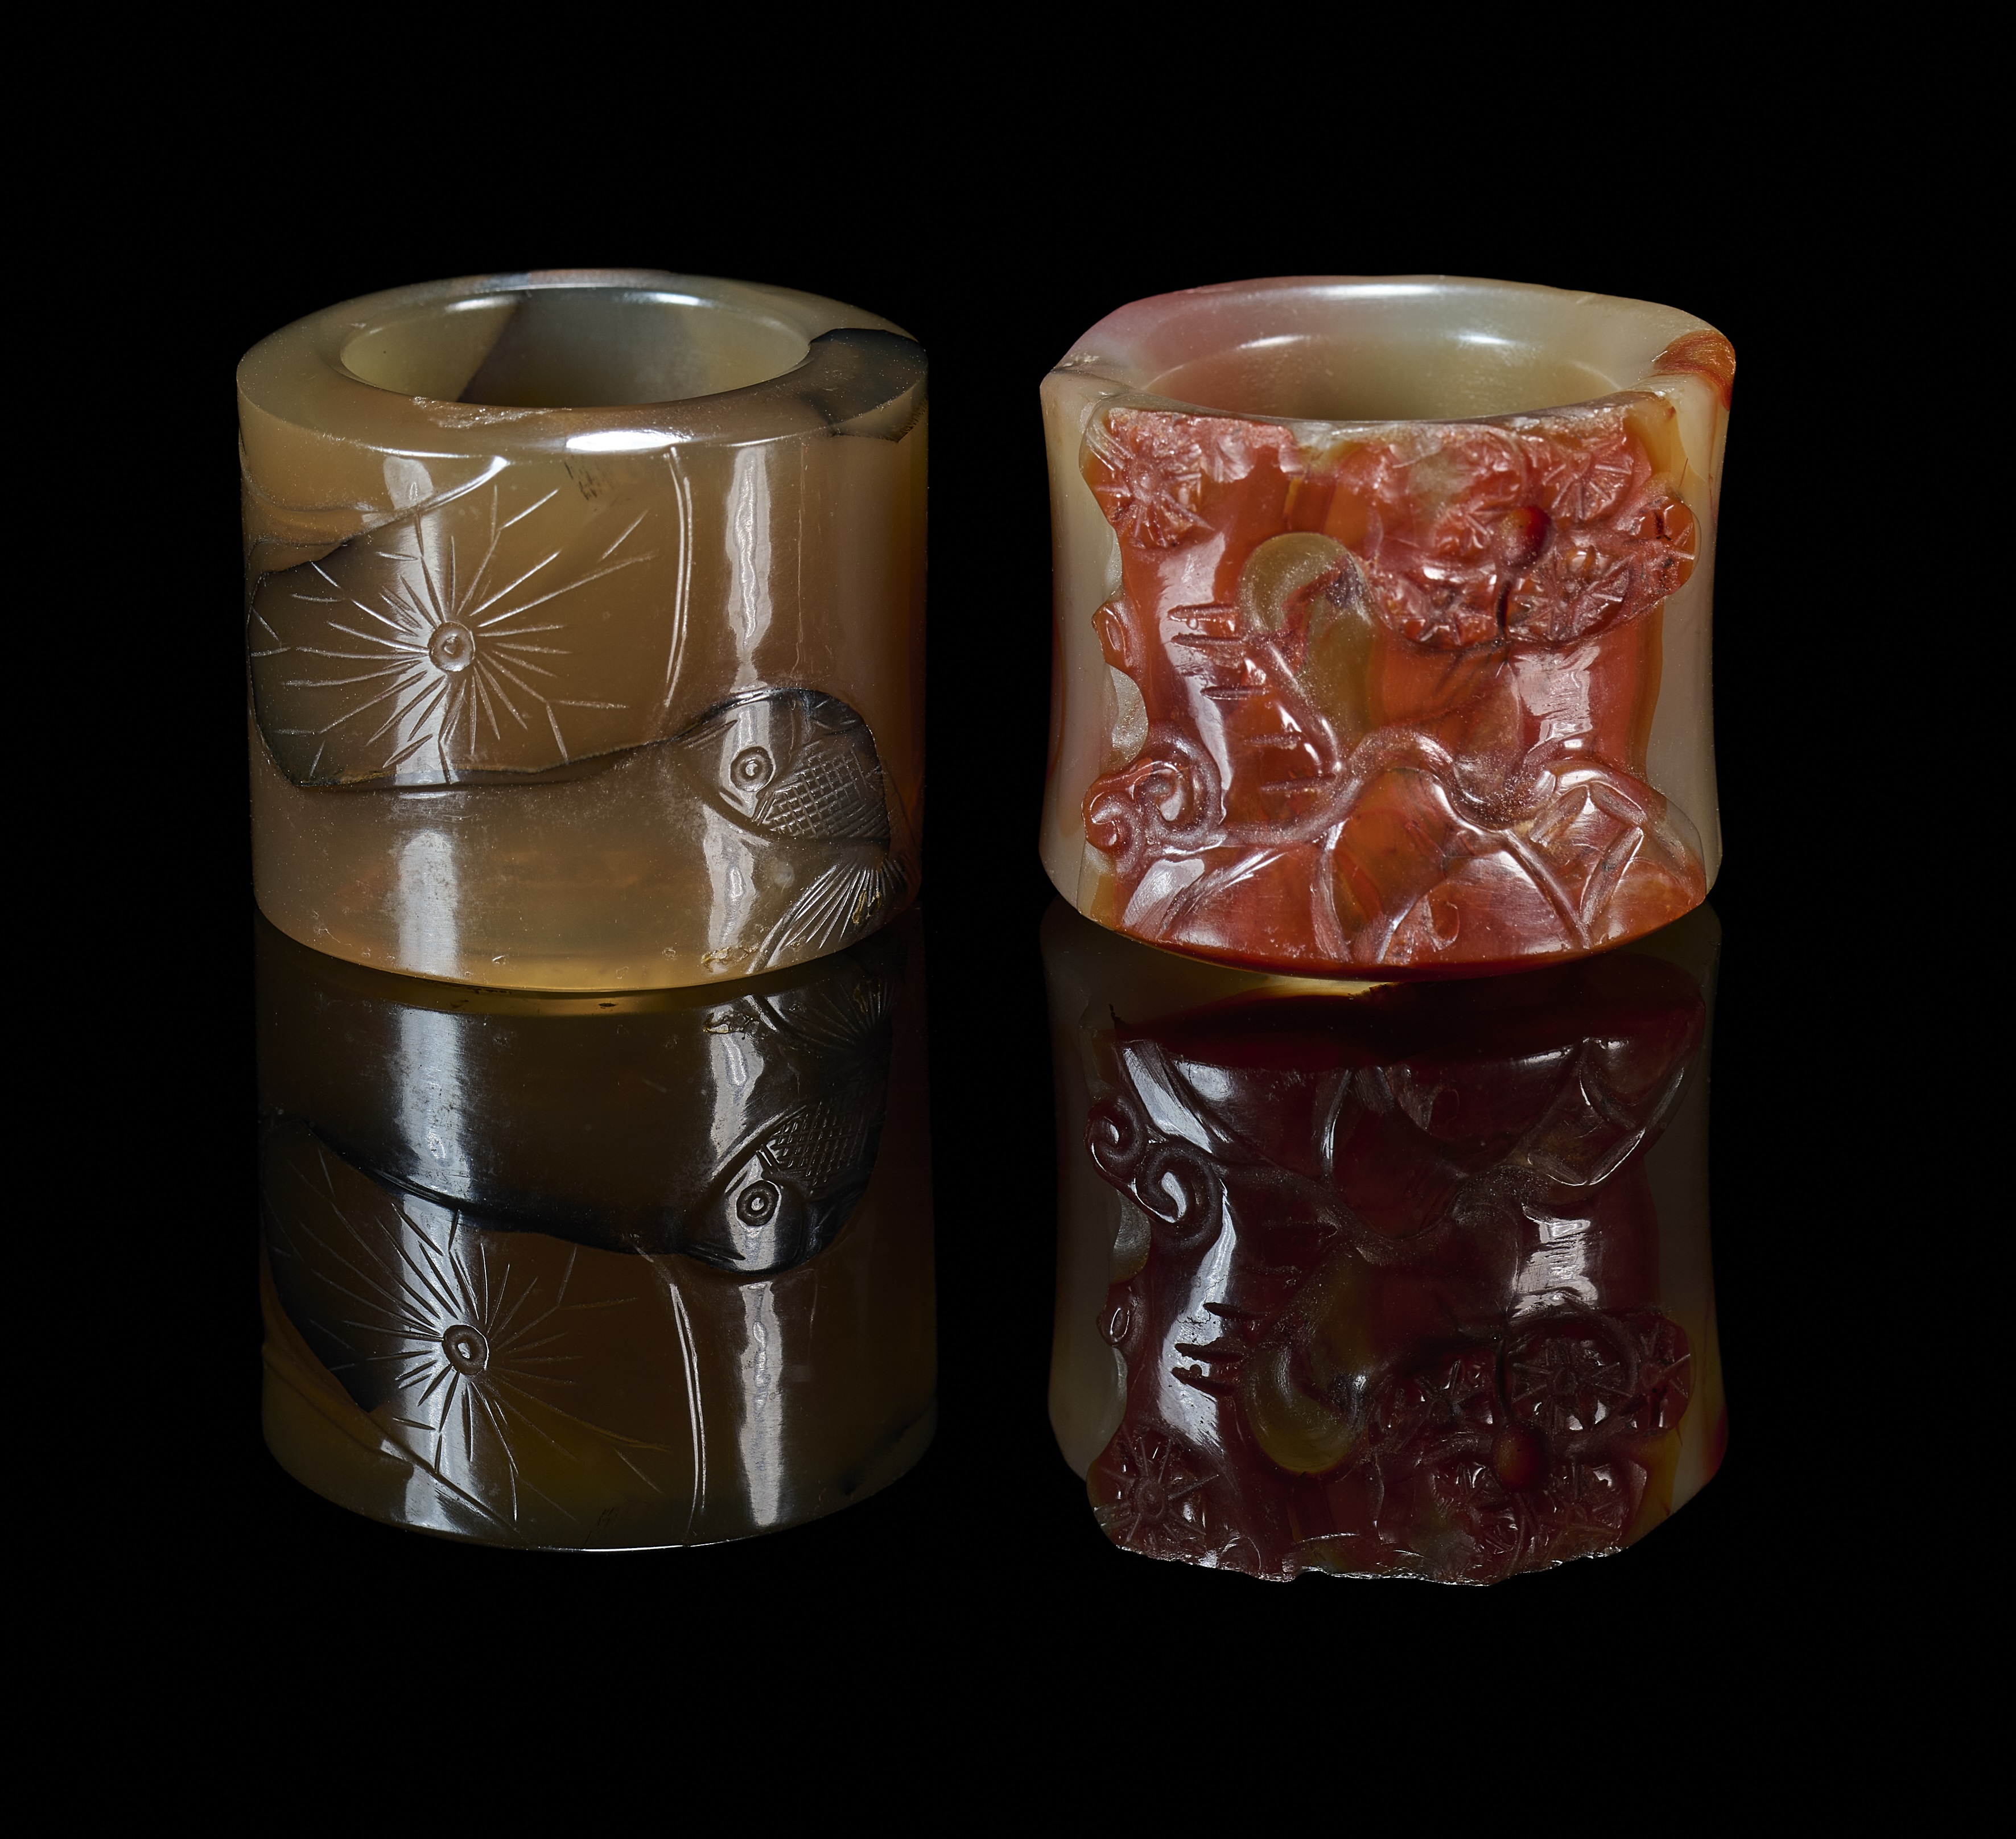 TWO CHINESE CARVED AGATE ARCHERS RINGS, QING DYNASTY, 19TH CENTURY